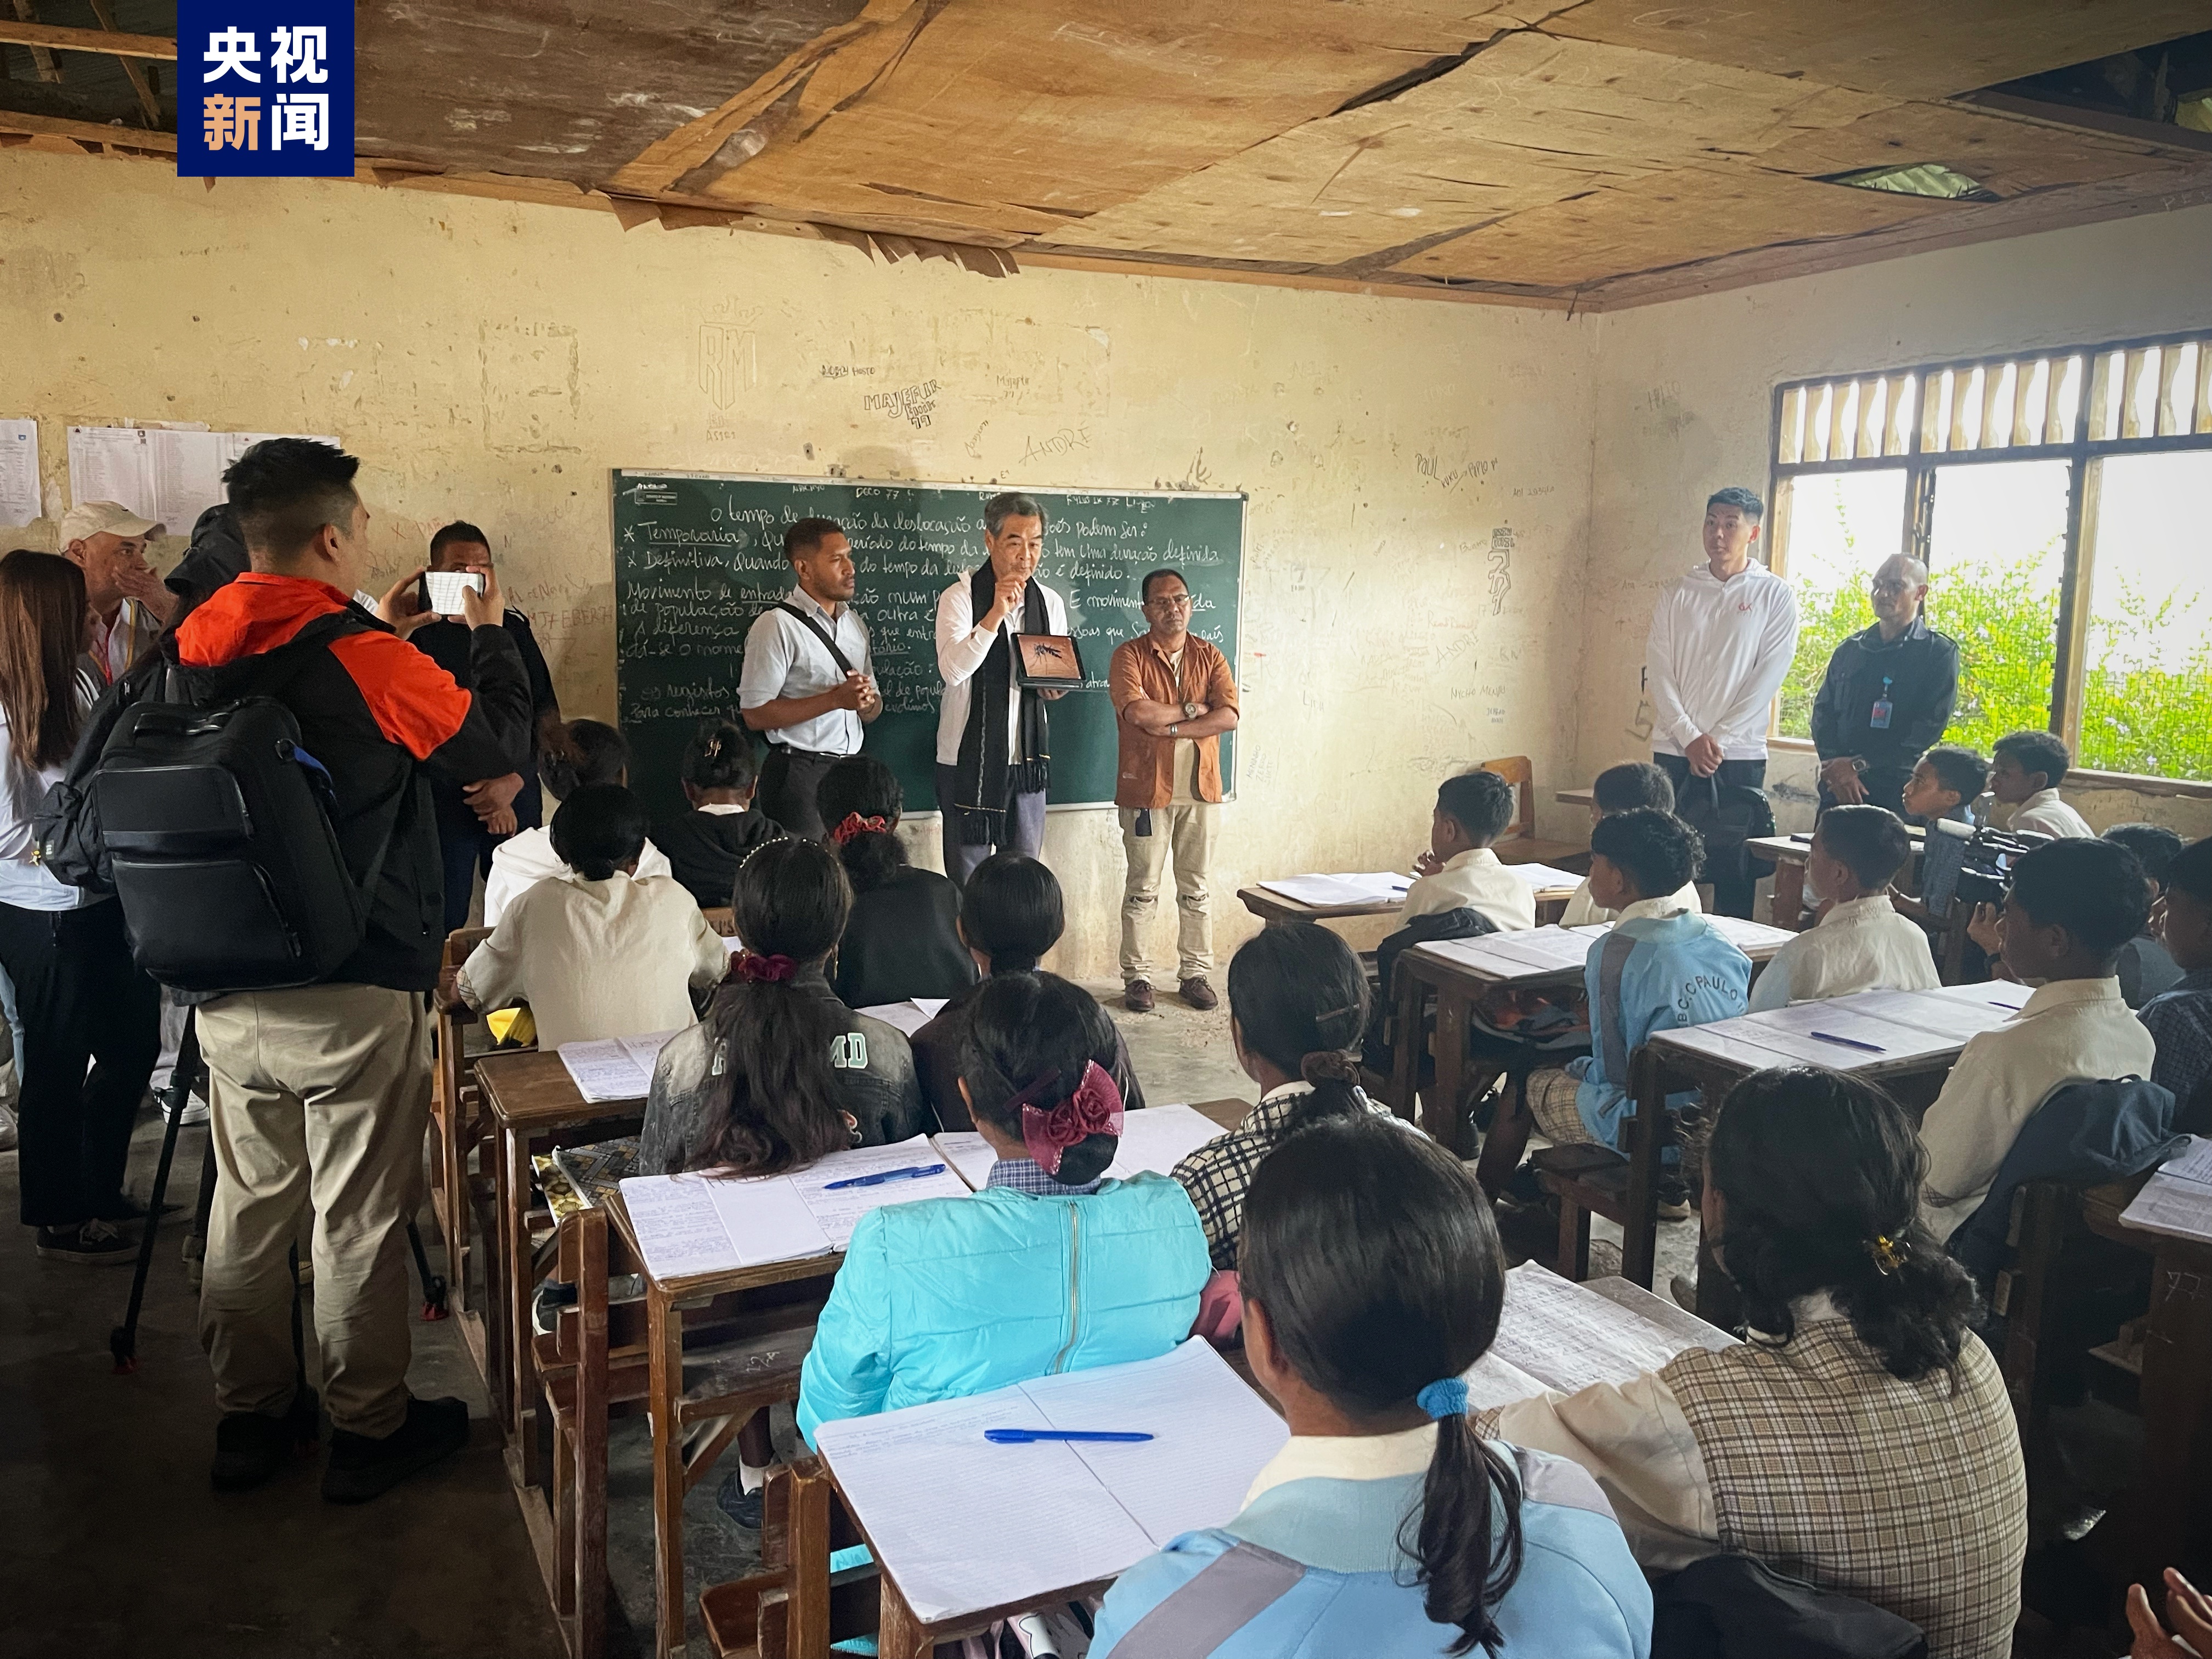 Leung Chun-ying introduces dengue fever prevention and control maesures at a school in the Maubisse mountains of Timor-Leste. /CMG